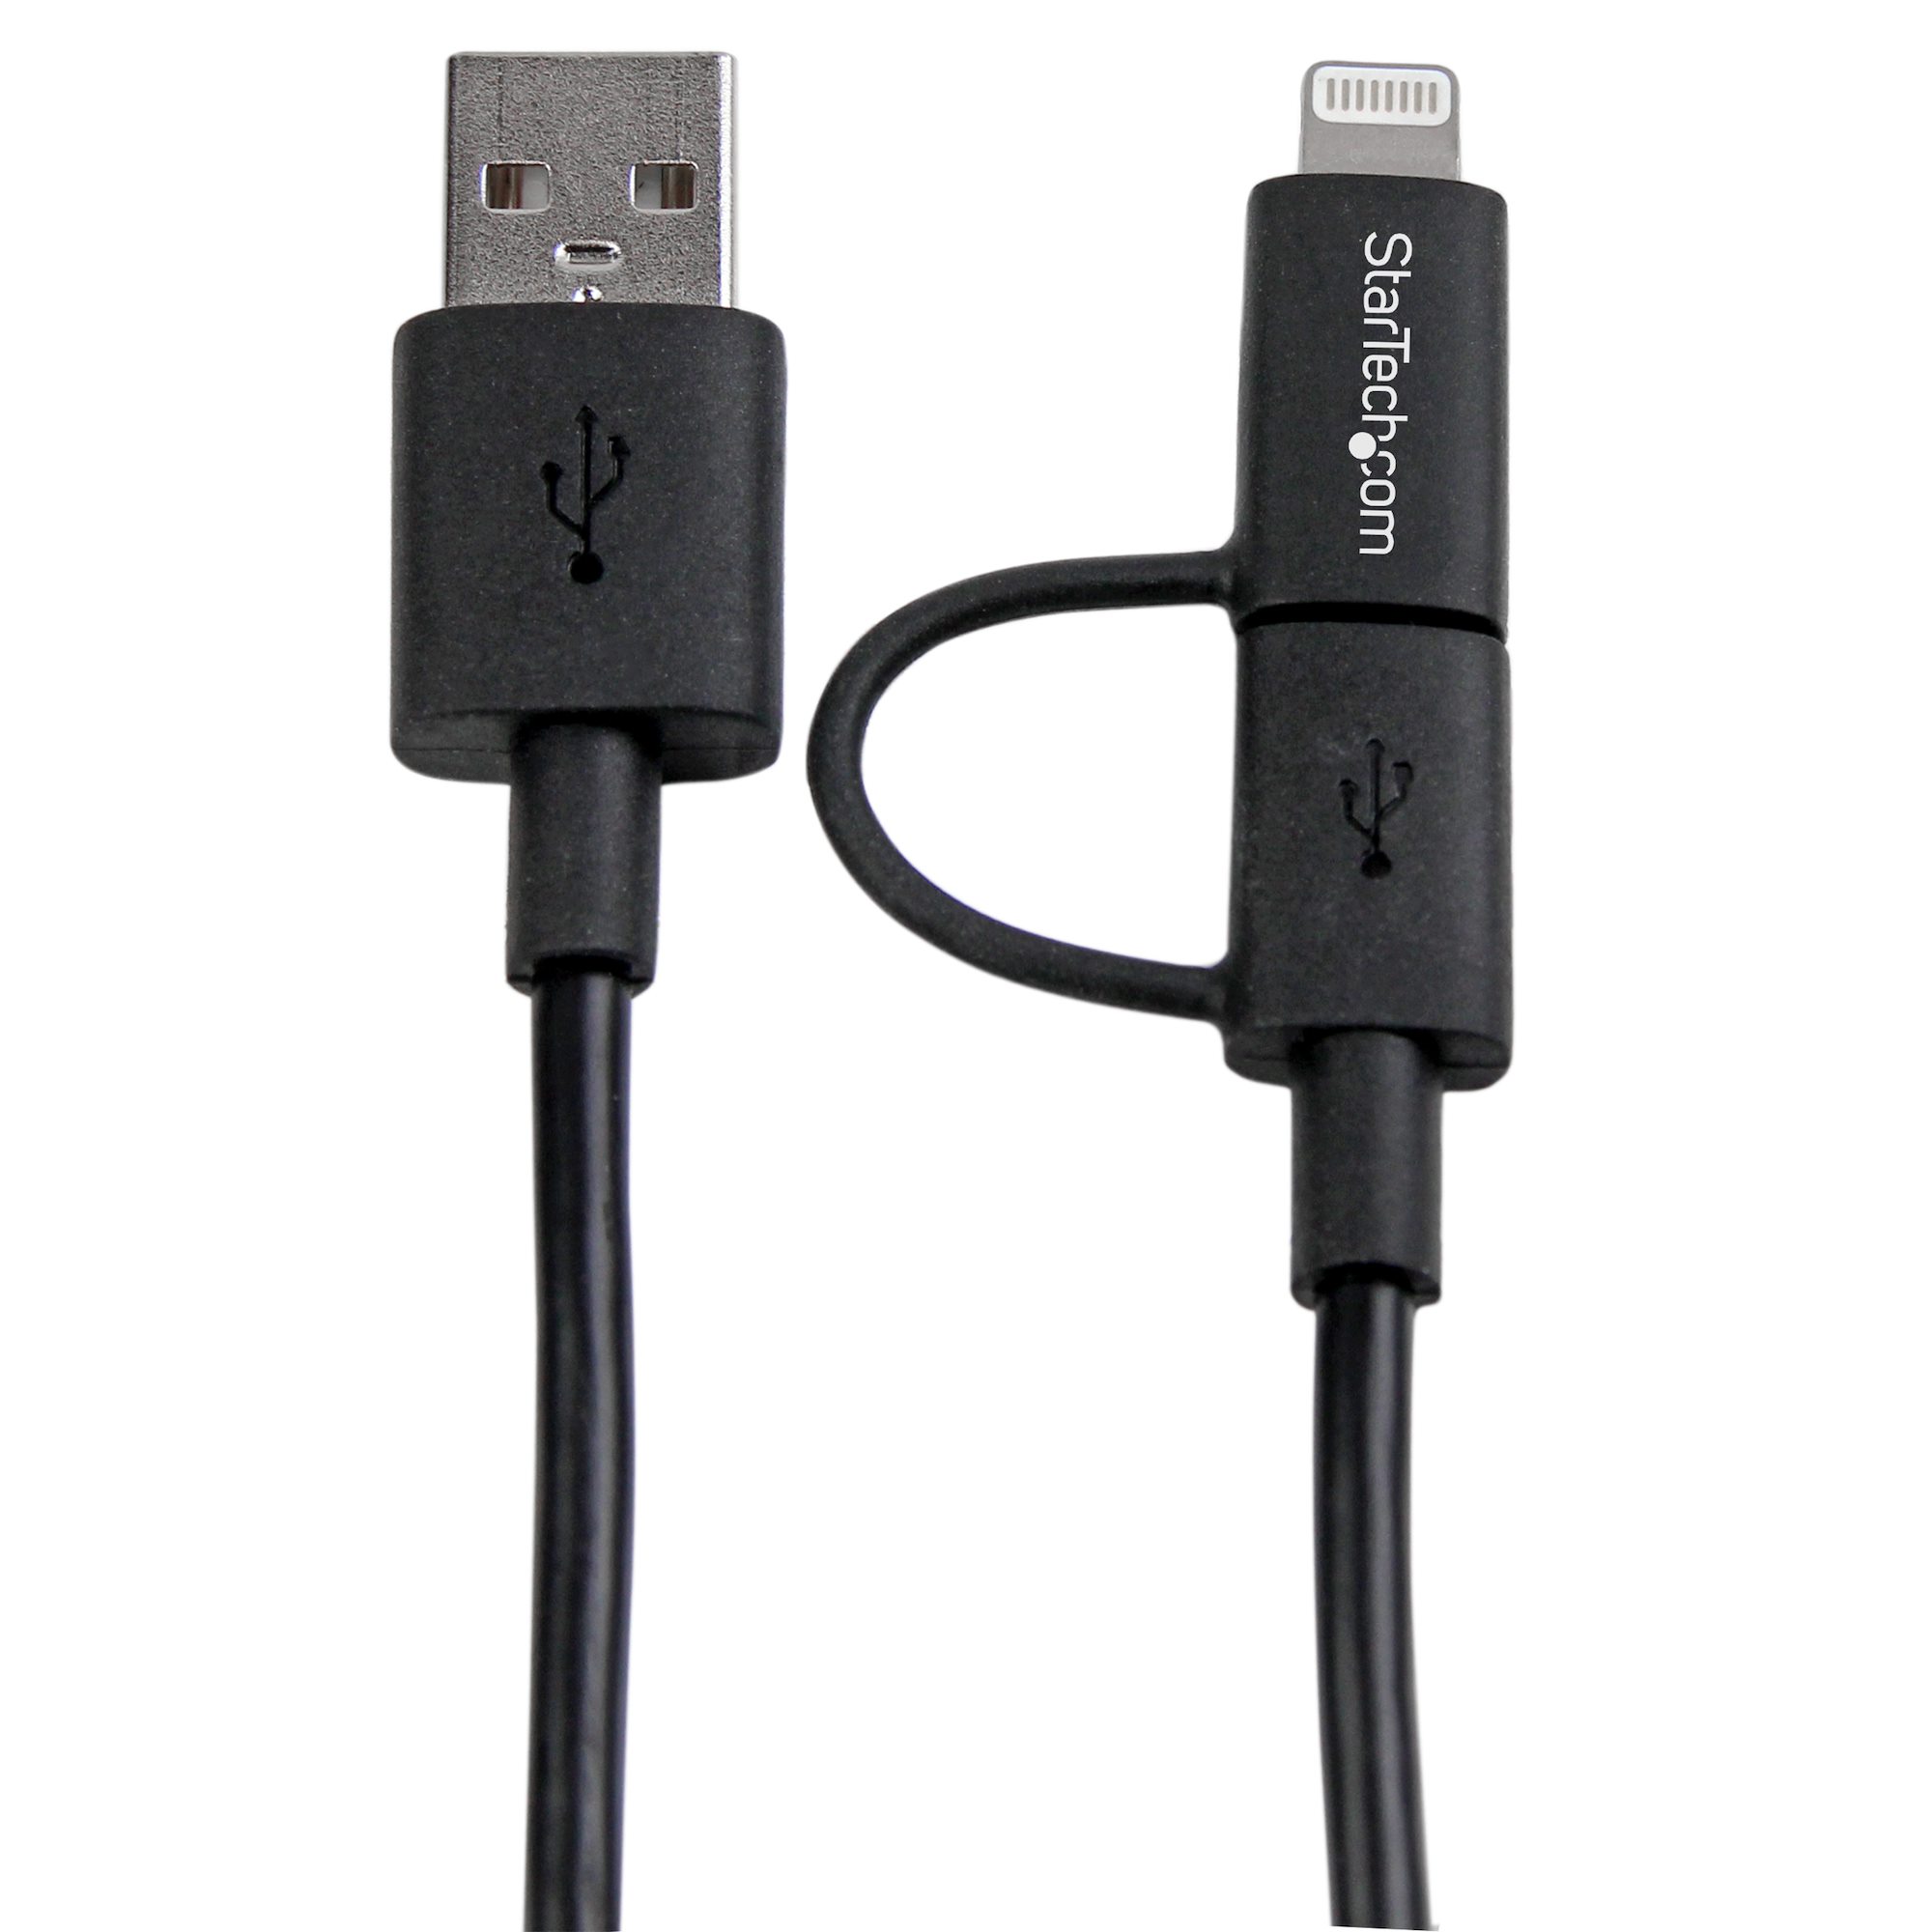 Fremsyn Foresee nå 1m Ligthning or Micro USB to USB Cable - Lightning Cables | StarTech.com